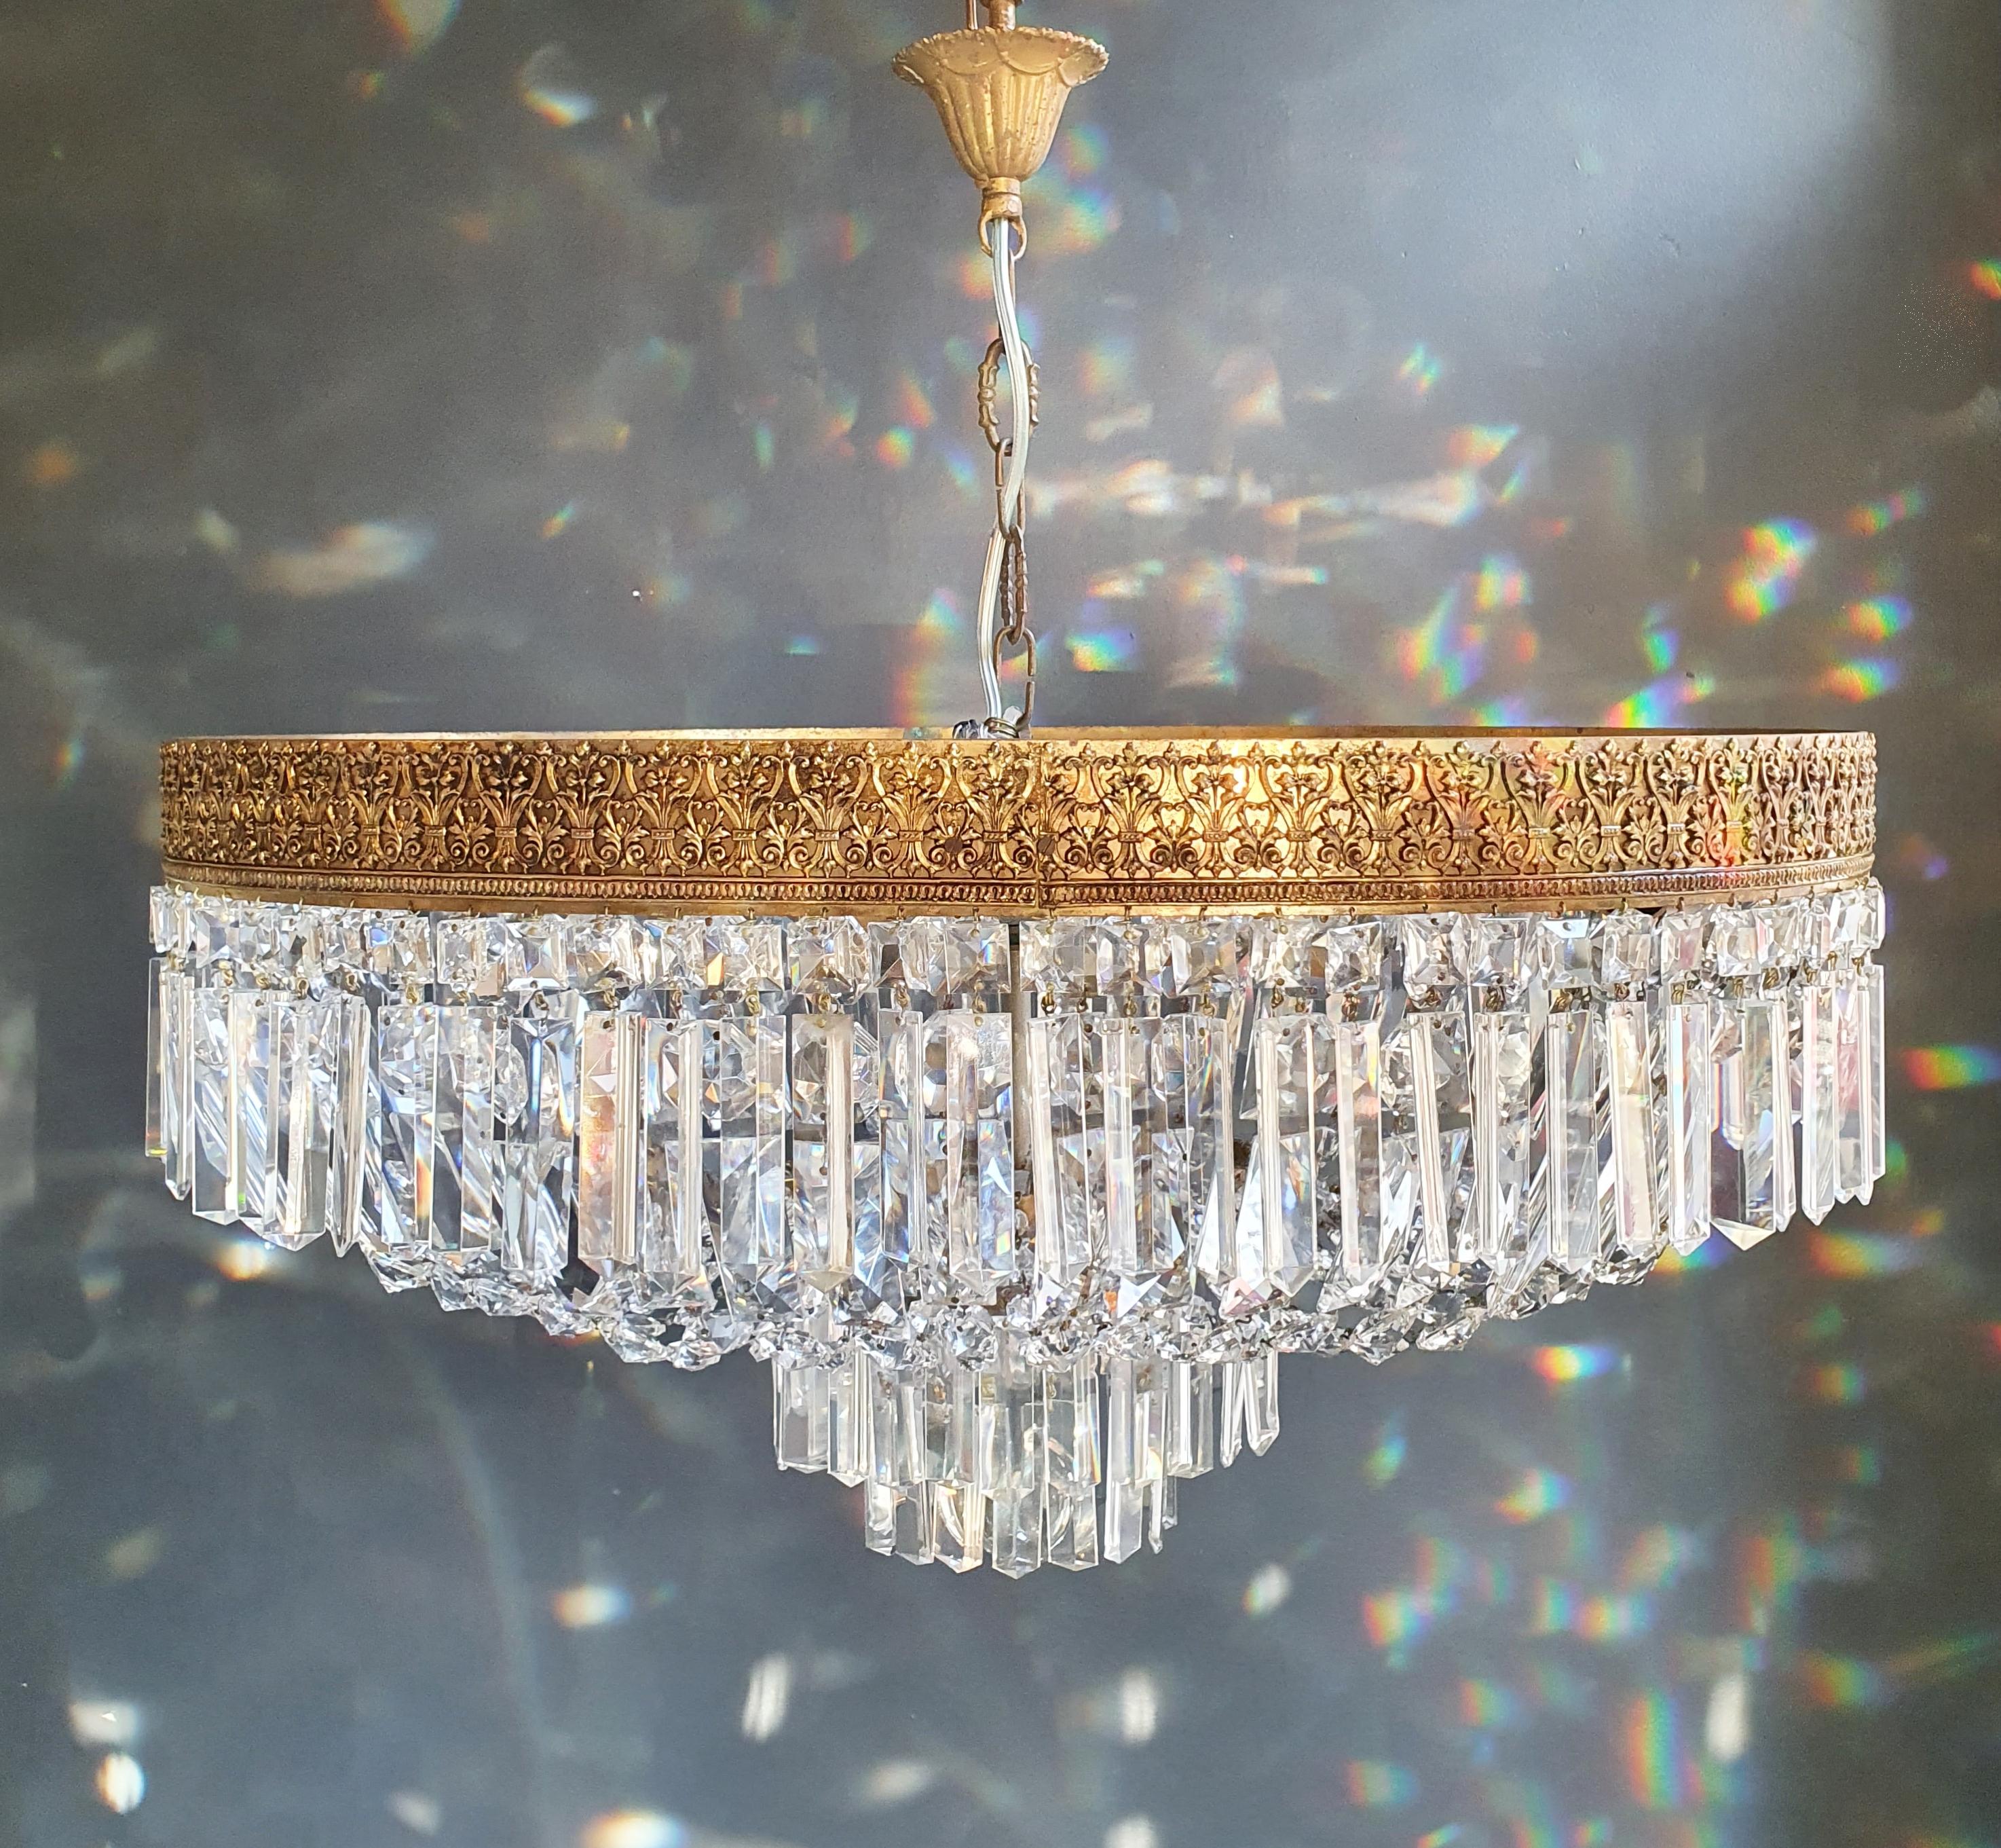 Low oval ceiling crystal chandelier brass.
Cabling completely renewed. Crystal hand knotted.
Measures: Total height 60 cm, height without chain 33 cm, diameter 61 x 40 cm. weight (approximately) 10kg.

Number of lights: 8-light bulb sockets: